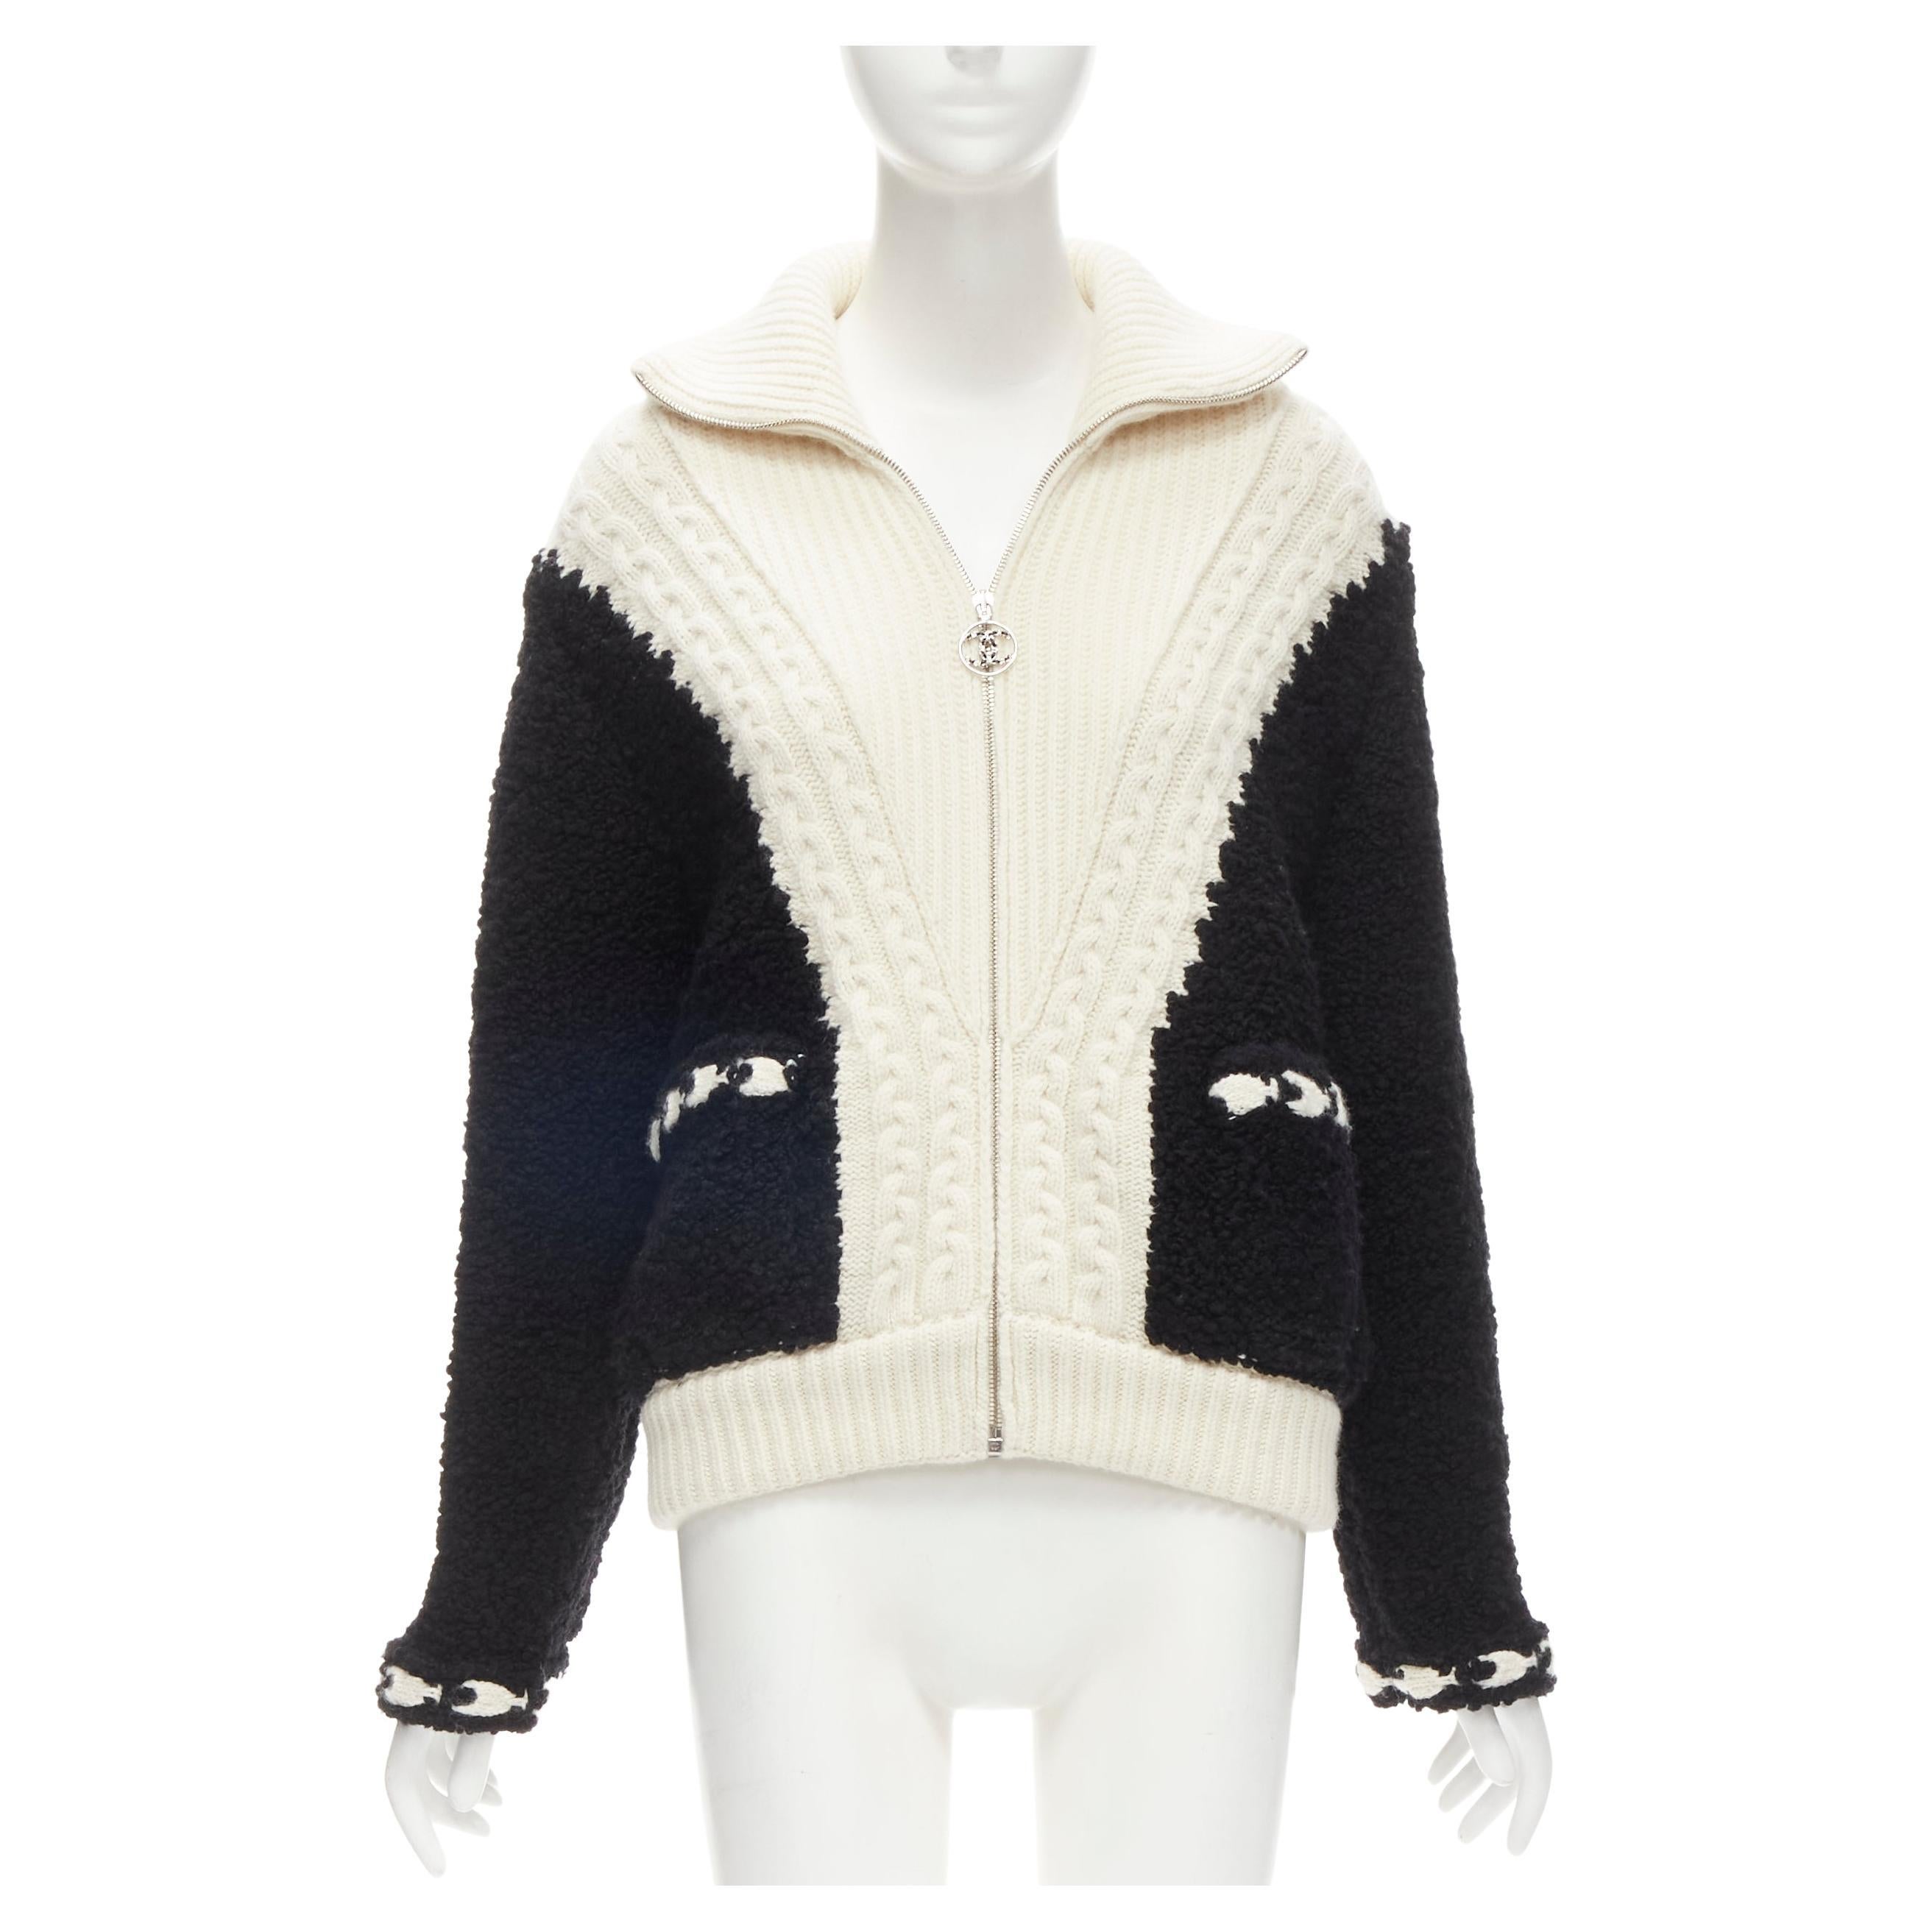 CHANEL black boucle cream cable knit faux layered cardigan jacket FR34 XS